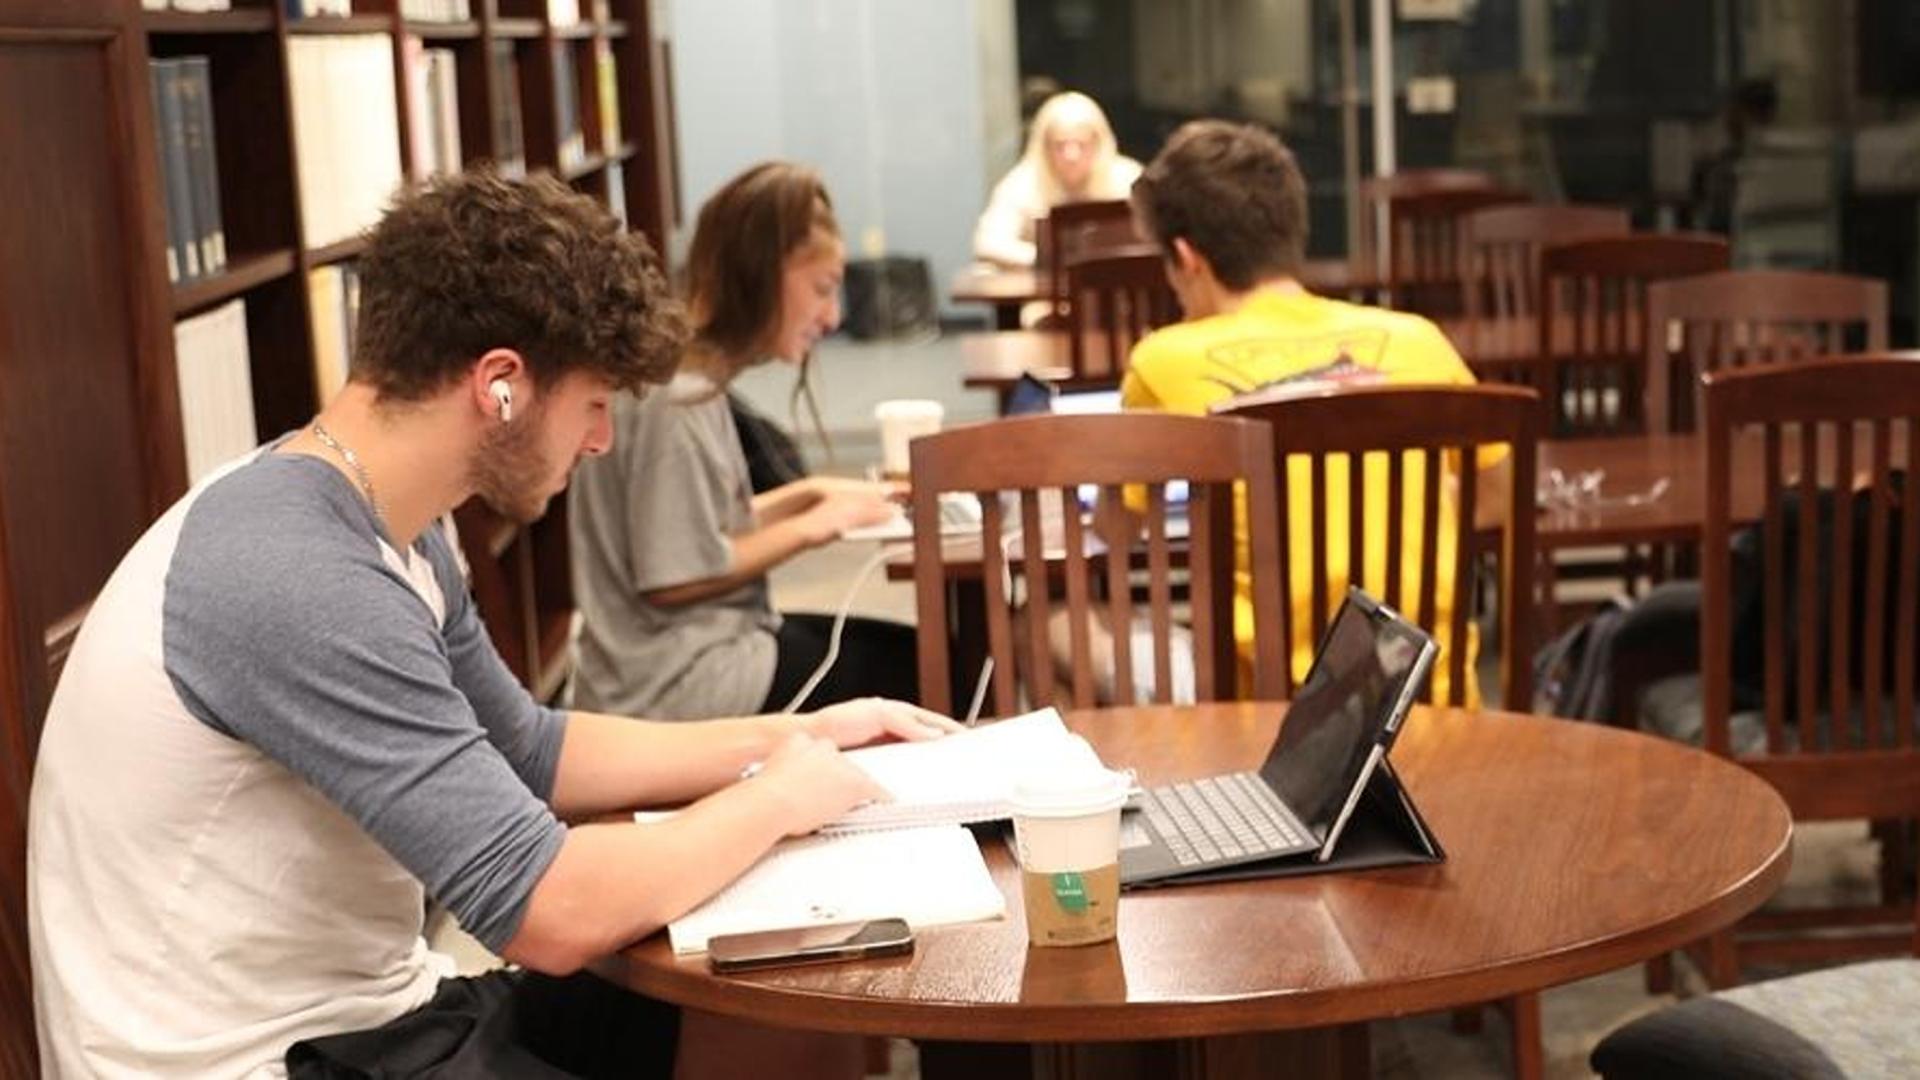 Student studying at table